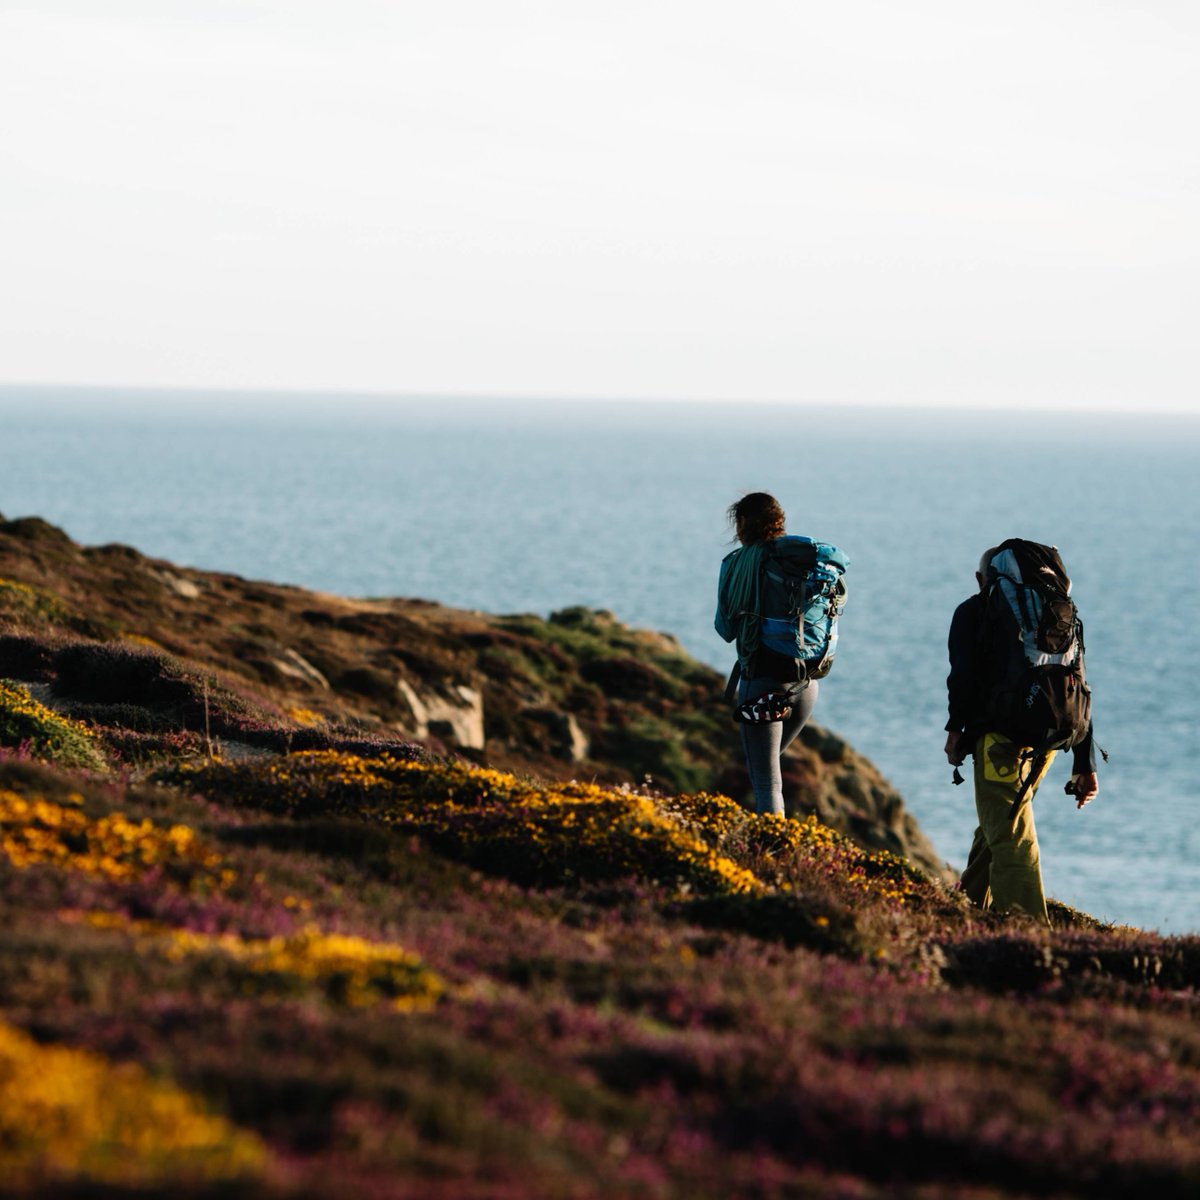 Calling all explorers! Take the north coast path towards Grosnez Castle and take in the breath-taking coastal views and medieval history. With vast green fields to the left and the sound of the crashing waves to your right, it doesn’t get more picturesque than that. #visitjersey